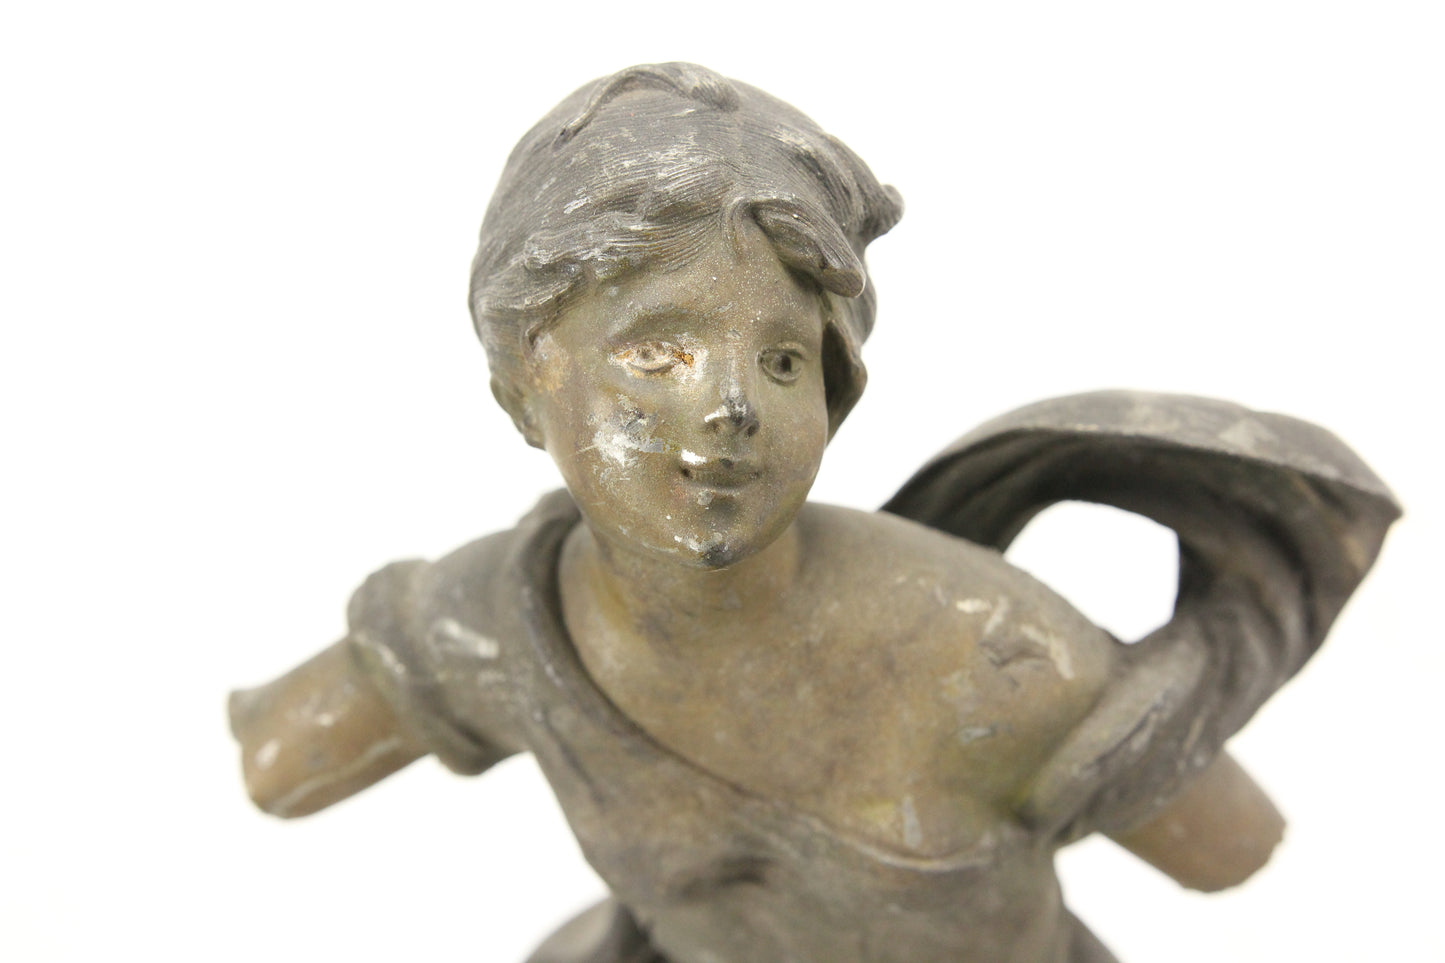 Large Spelter Pot Metal Statue of a Woman " L'Echo" (Missing Arms)